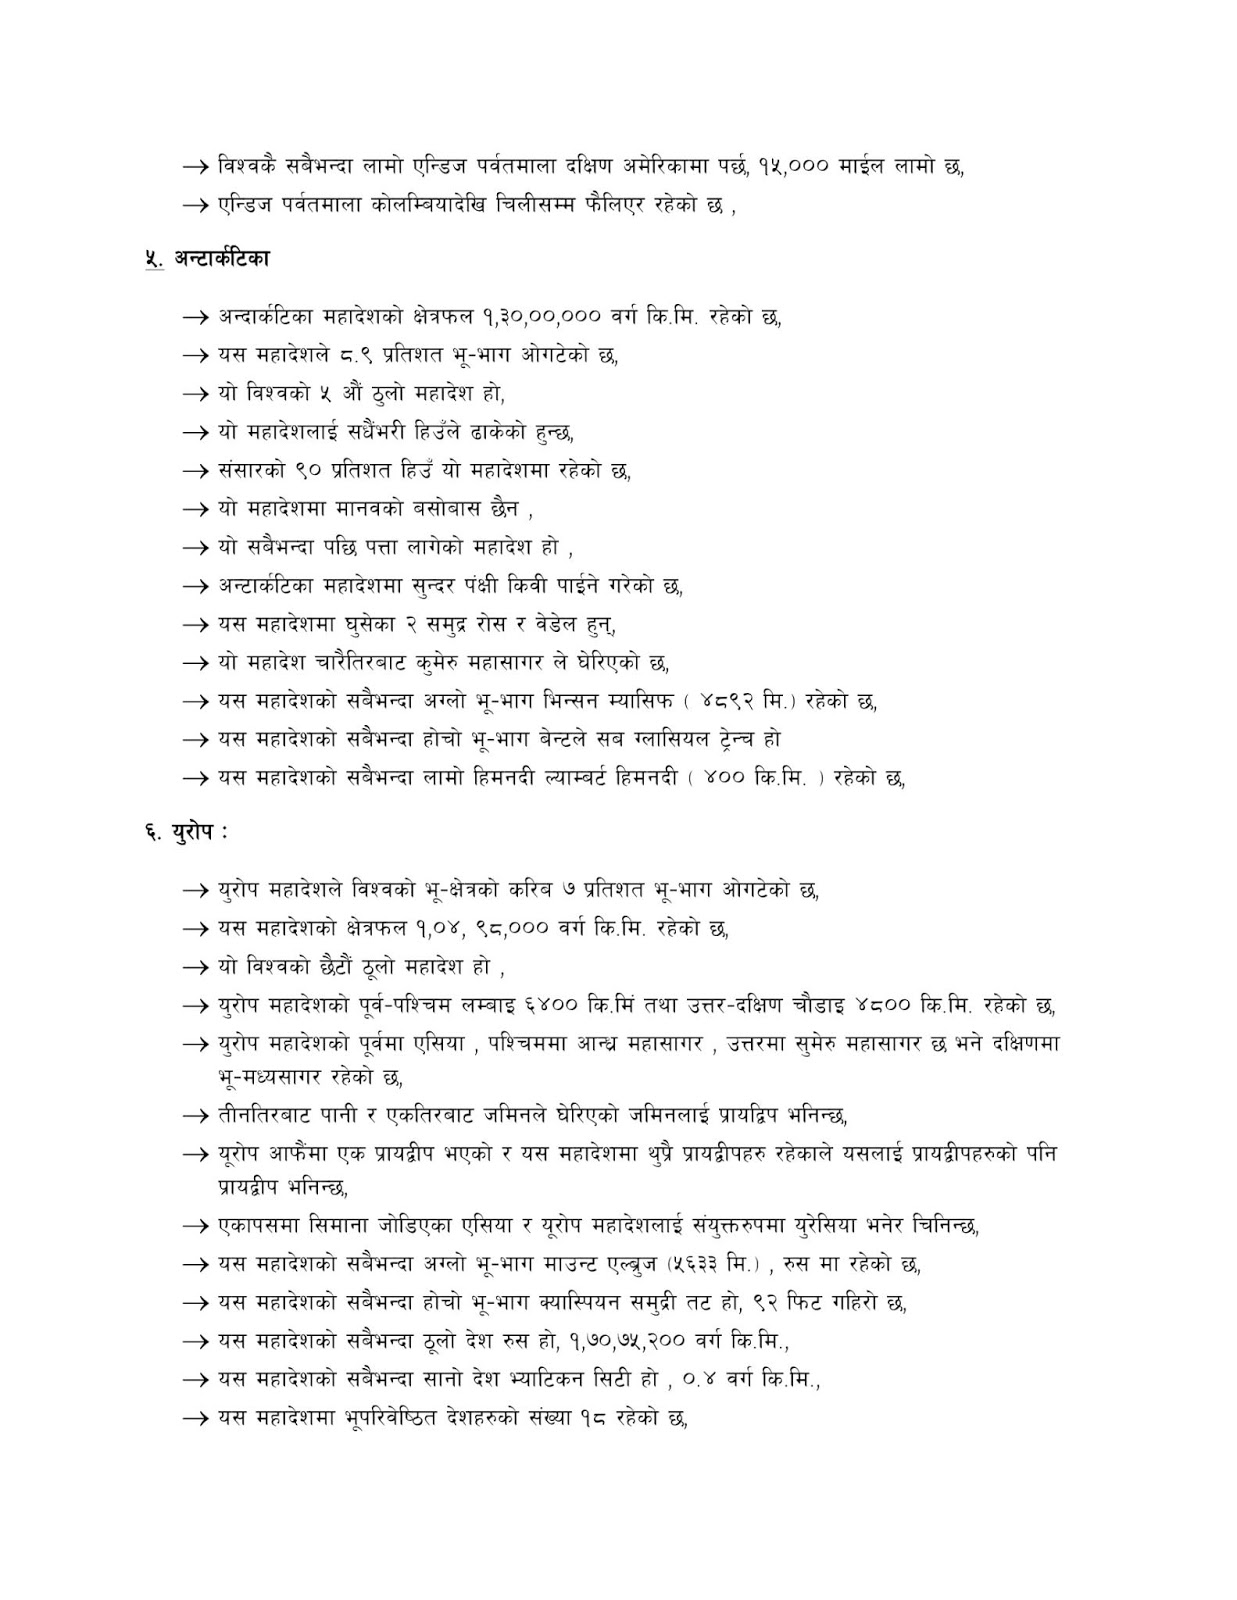 World Geography - Bishwo Bhugol - विश्व भूगोल Important Notes For All